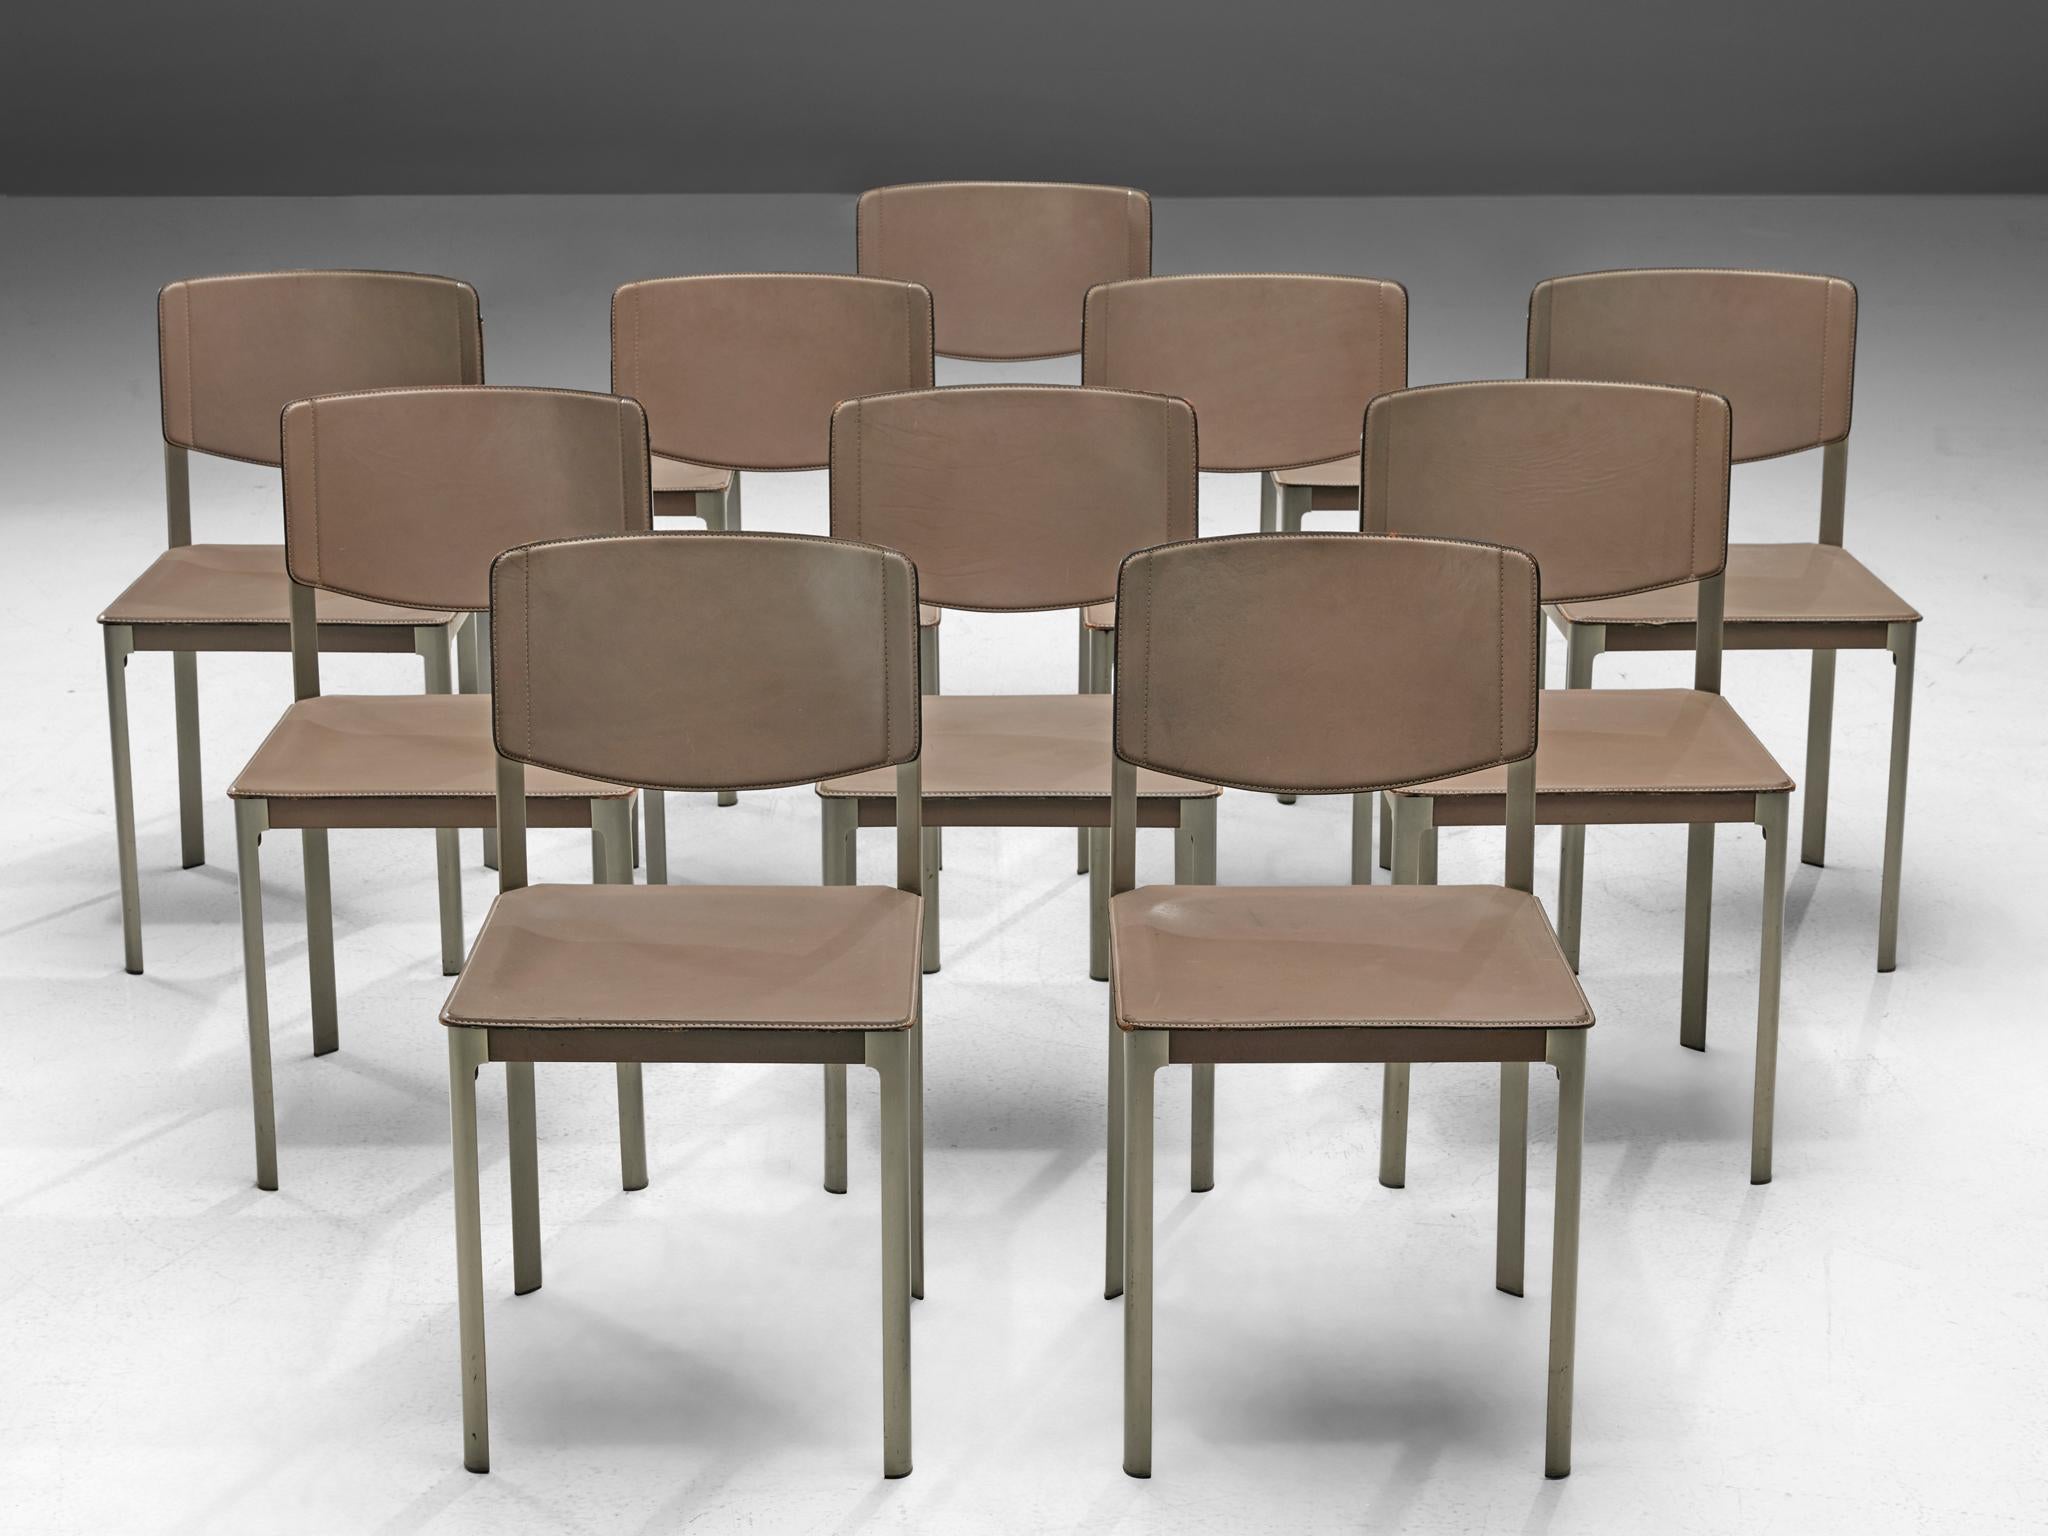 Post-Modern Matteo Grassi Set of Ten Dining Chairs in Leather and Steel For Sale